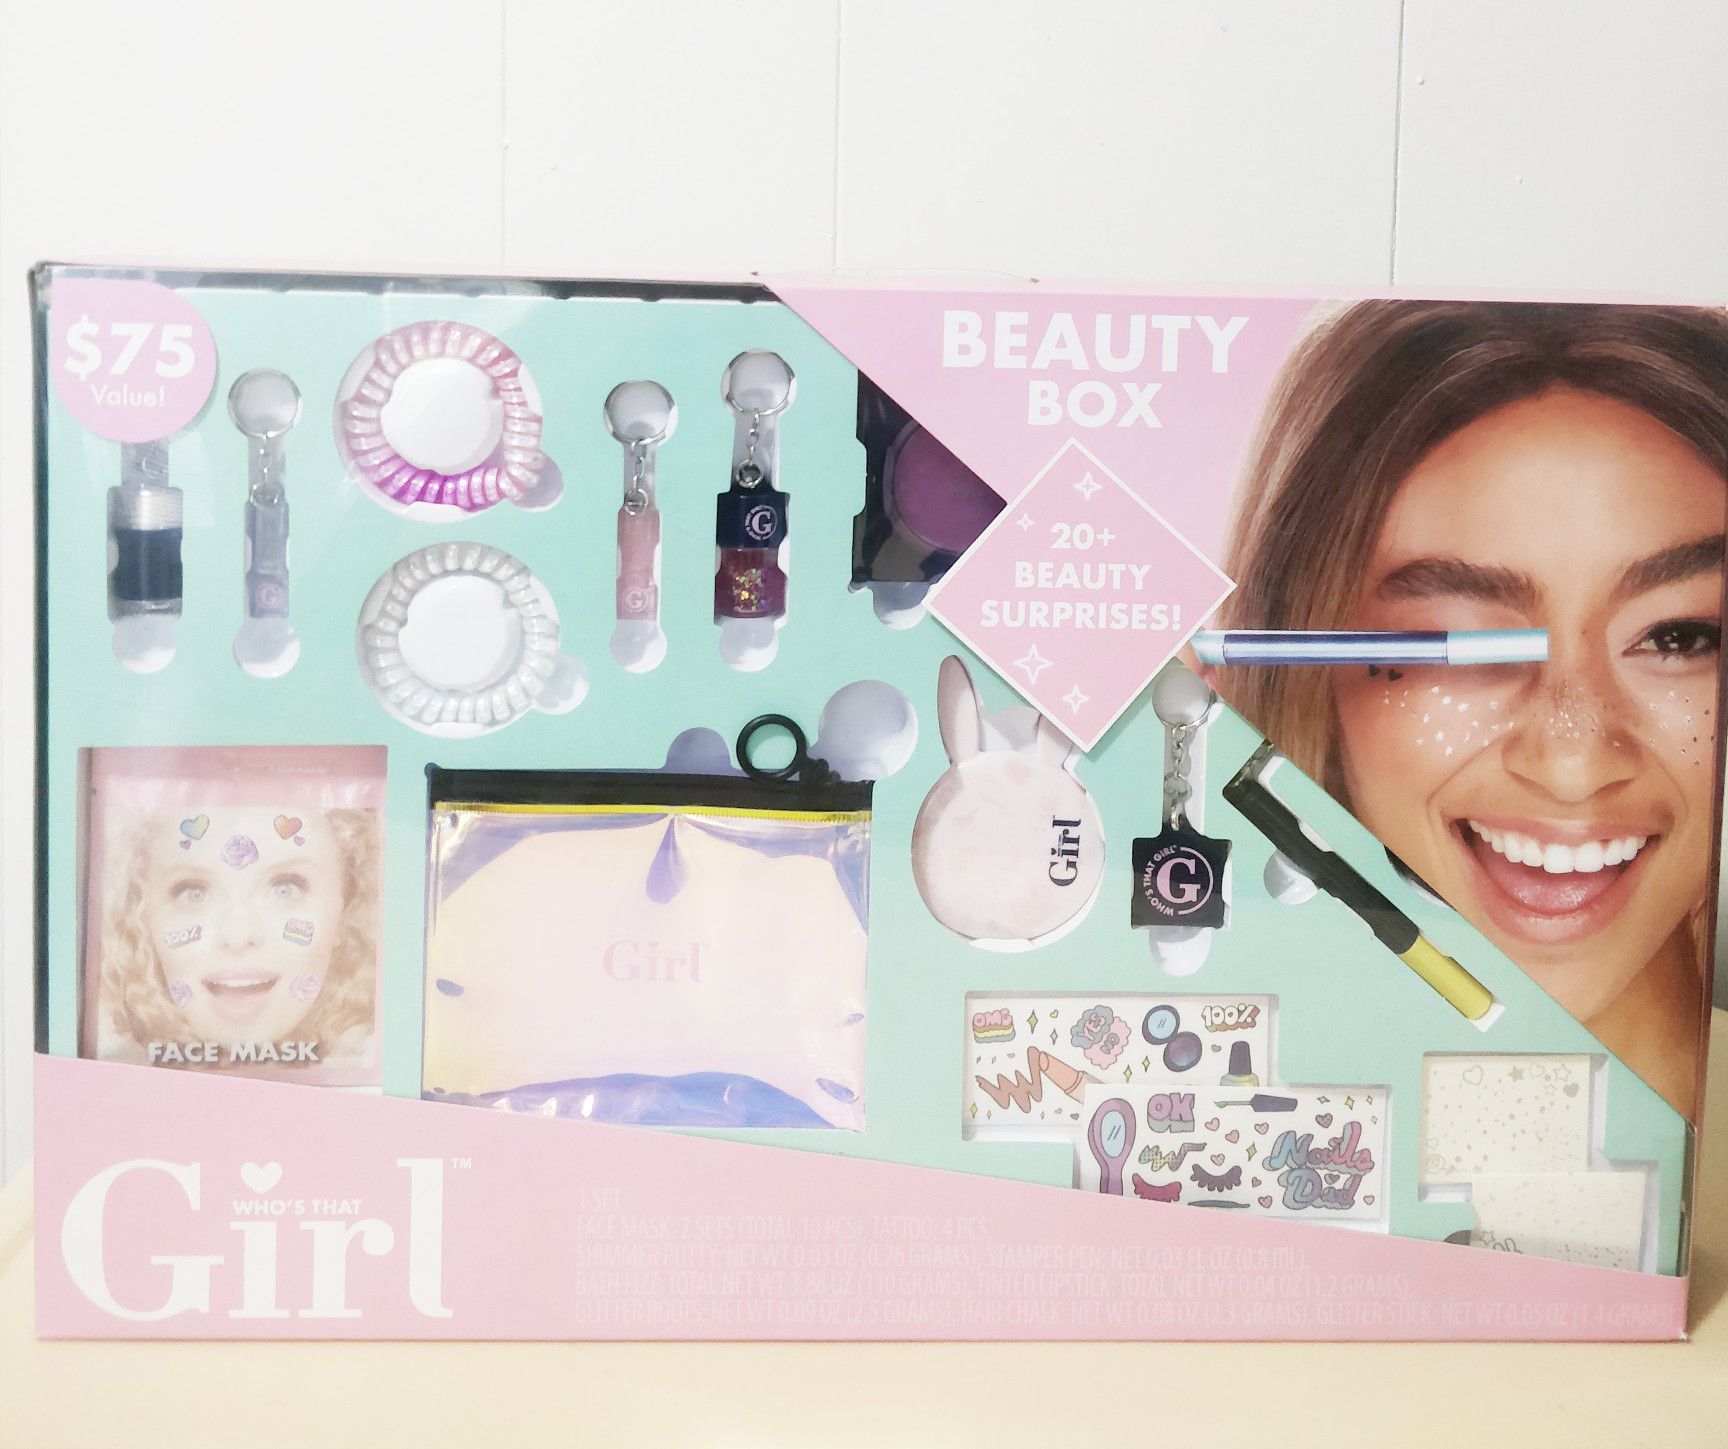 Beauty Box with 20+ Beauty Surprises.